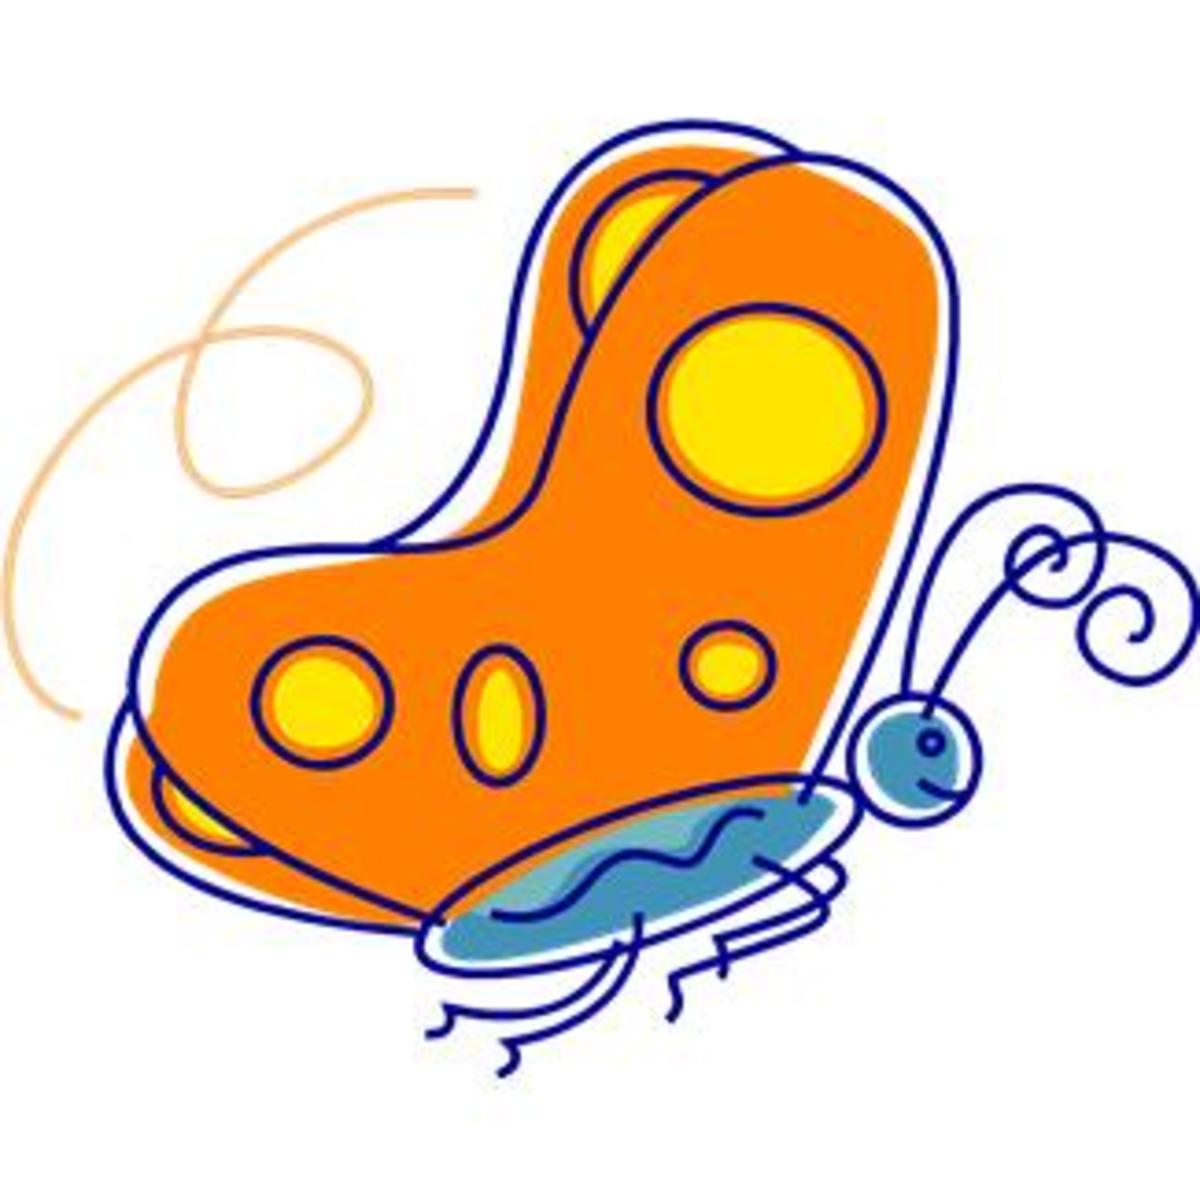 Clip Art of Blue Butterfly with Orange Wings